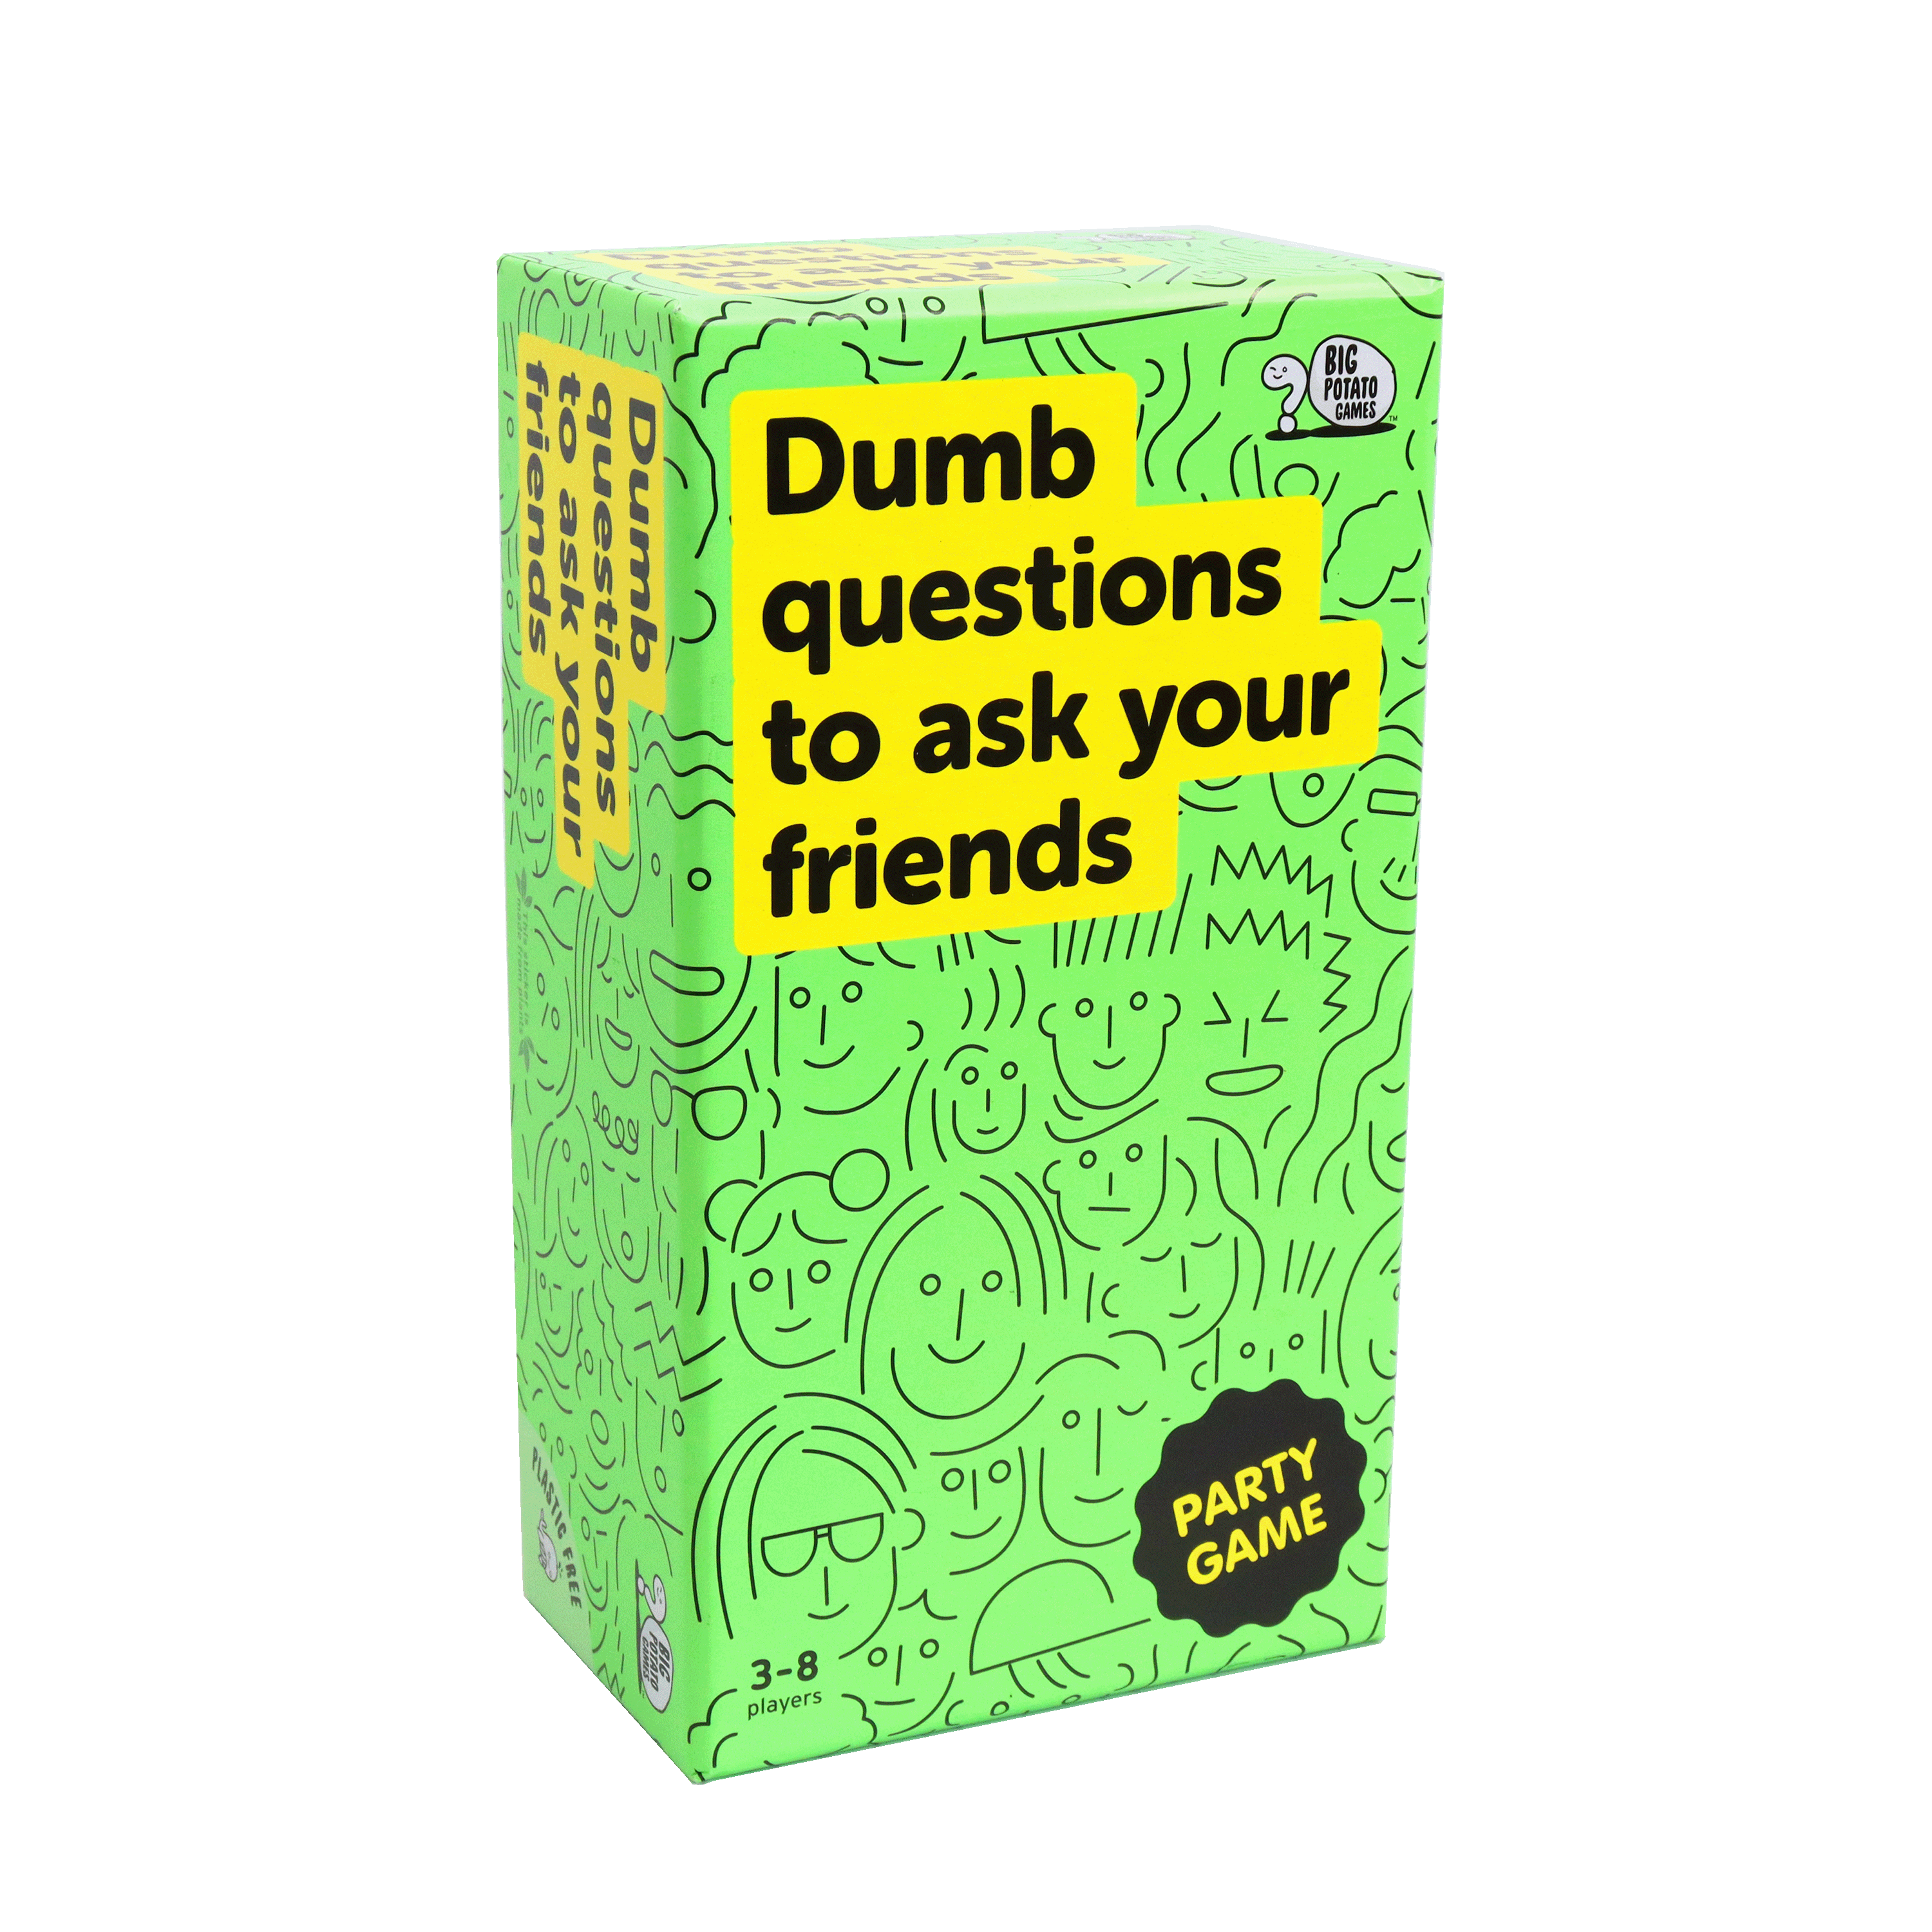 Dumb Questions to Ask Your Friends